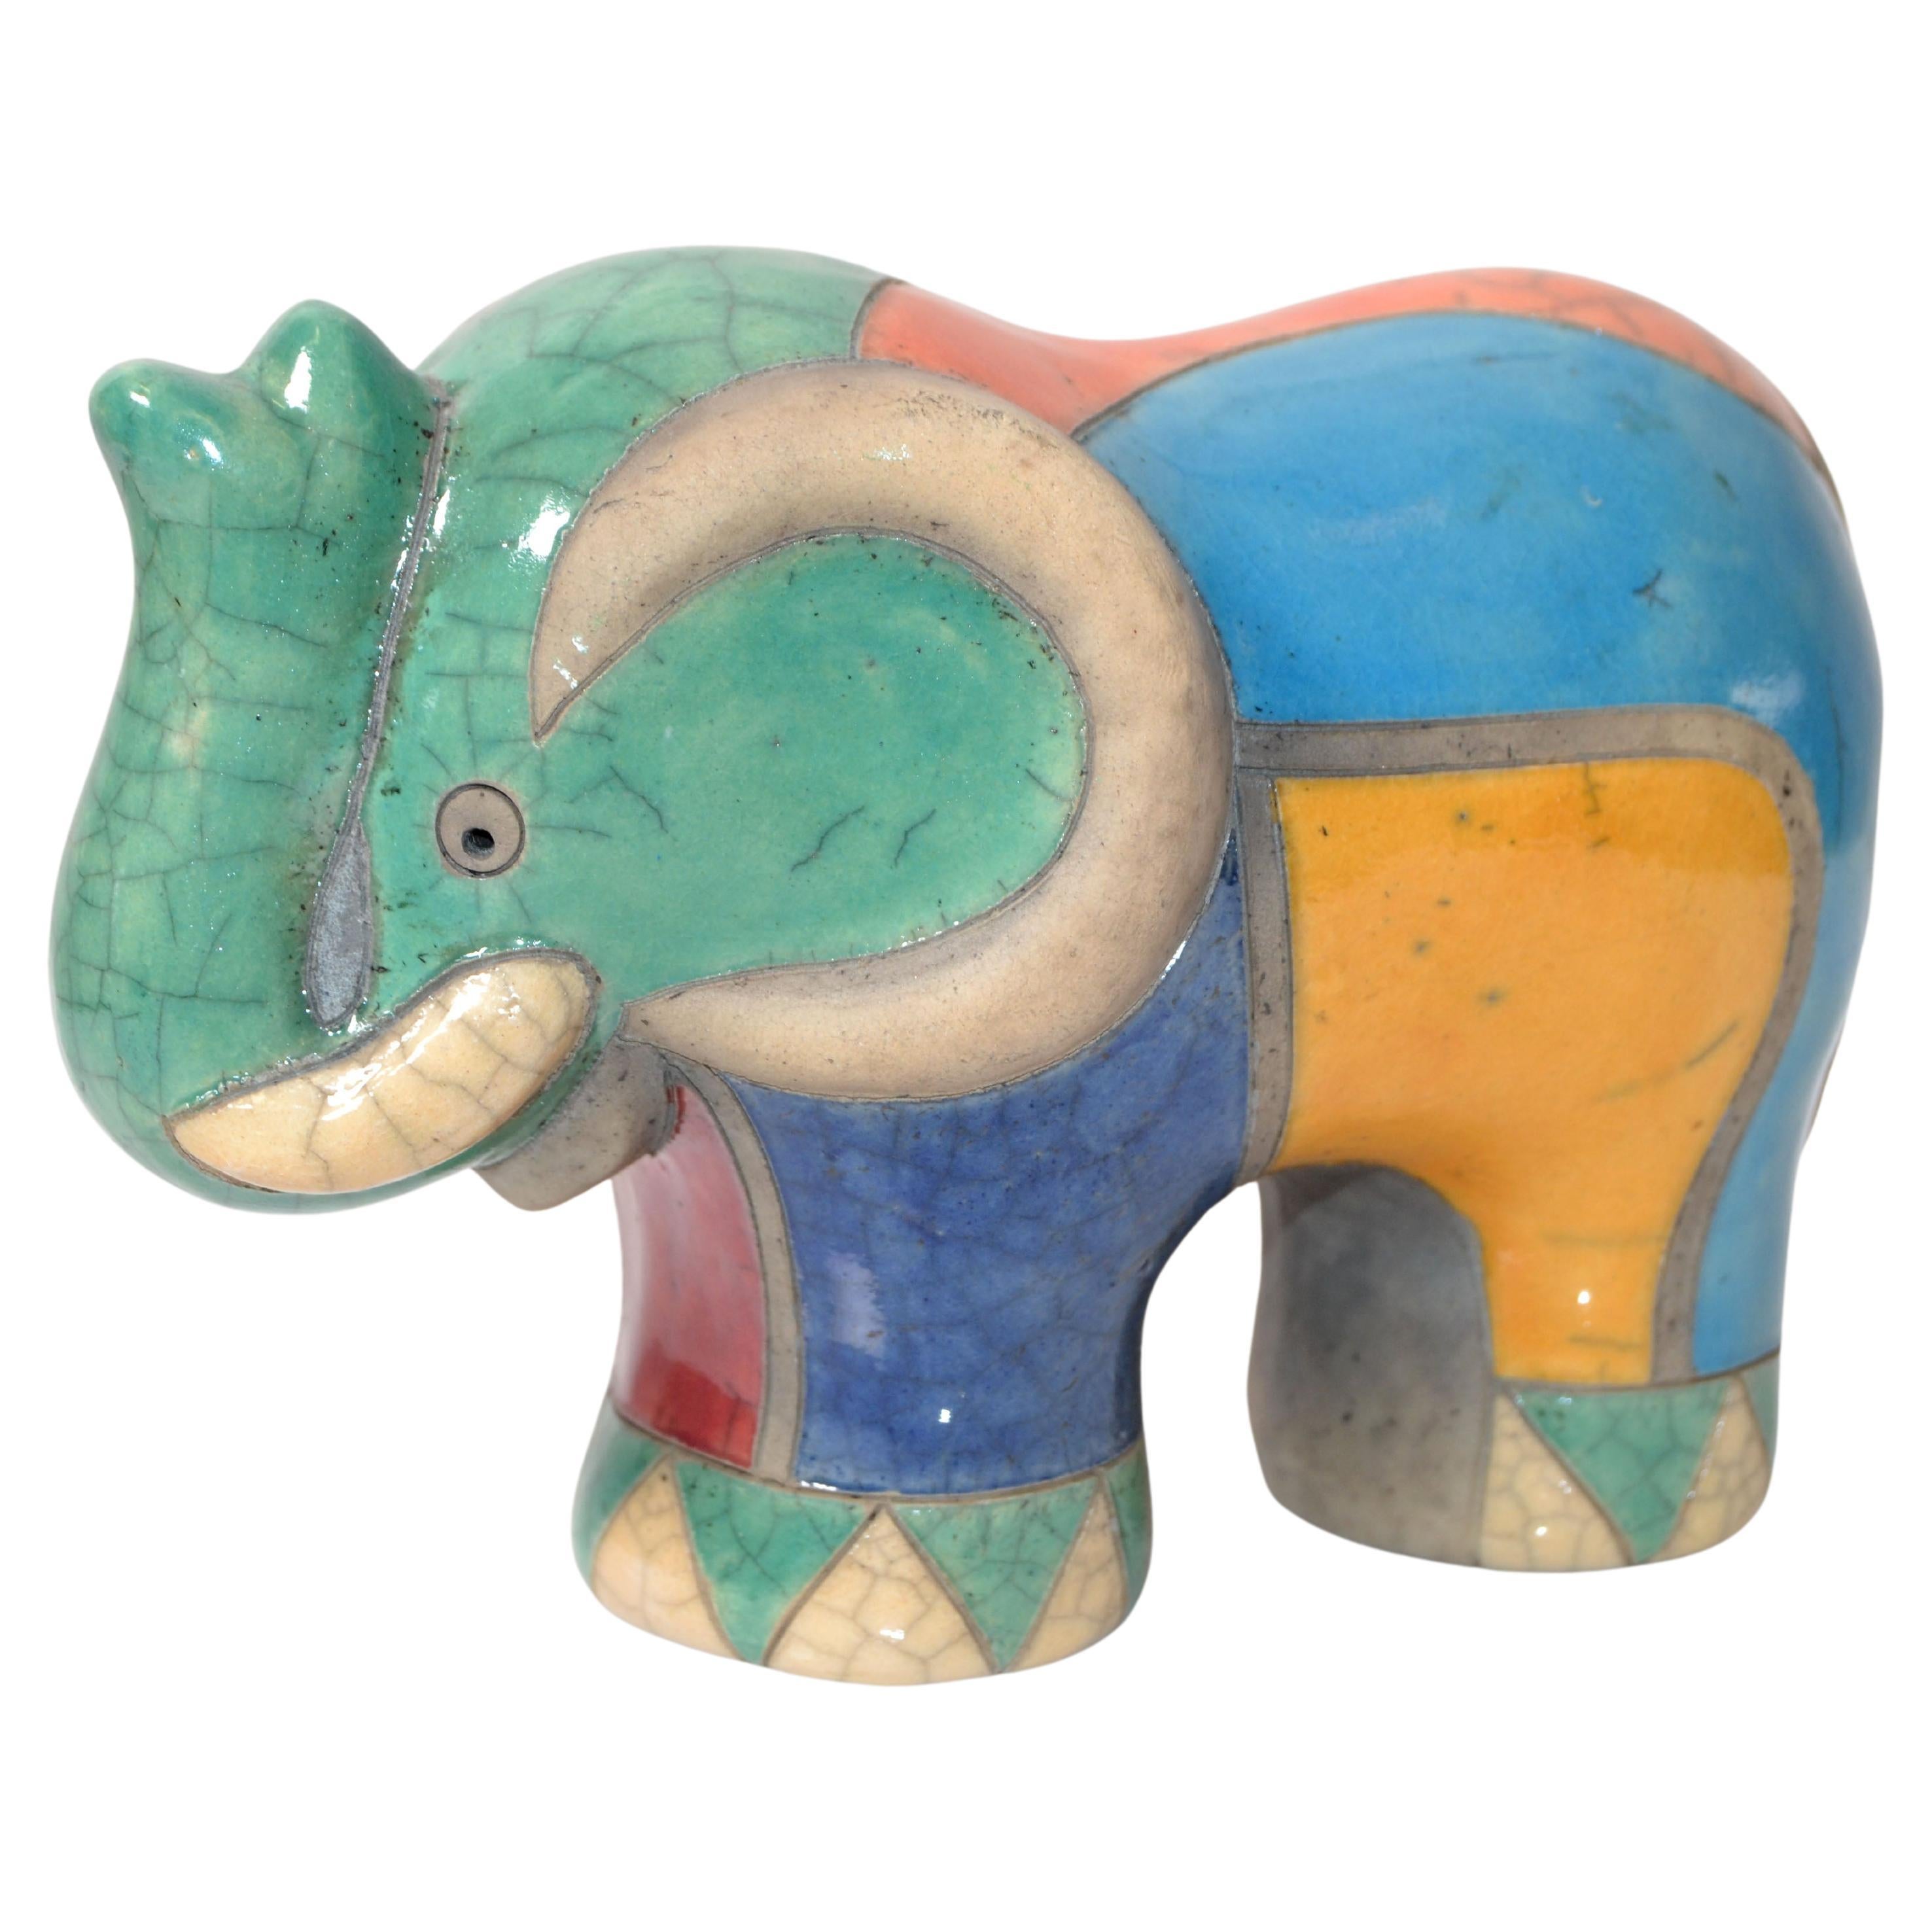 Luca CL Marked Colorful Ceramic Elephant Sculpture Mid-Century Modern Italy 1970 For Sale